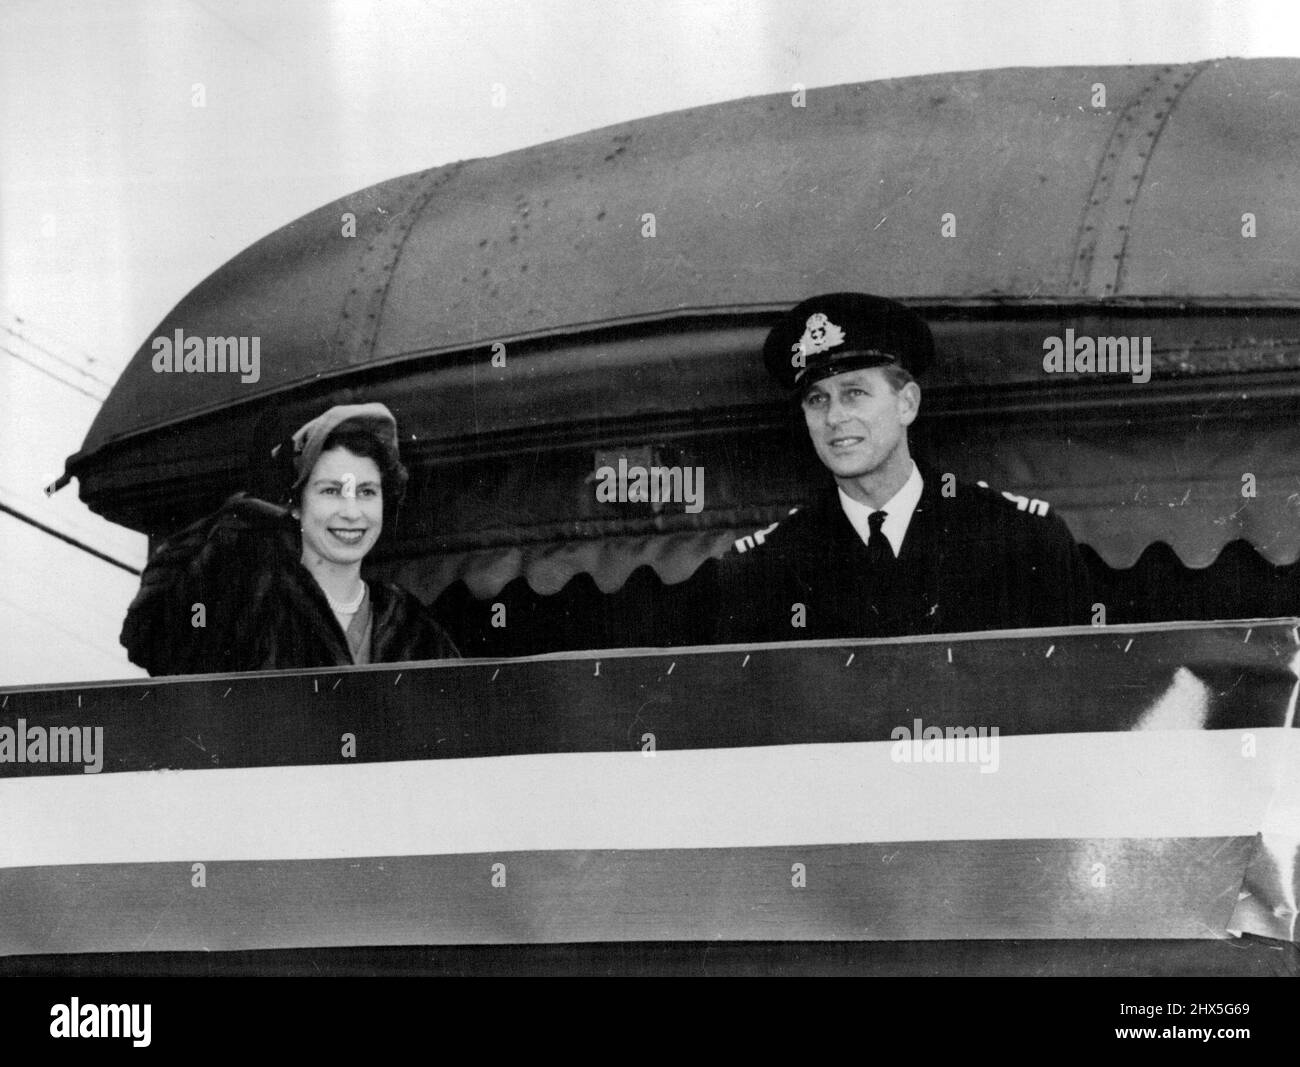 On Platform Of The Royal Train -- Princess Elizabeth and the Duke of Edinburgh on the Platform of the observation car which will take them across Canada. October 10, 1951. Stock Photo